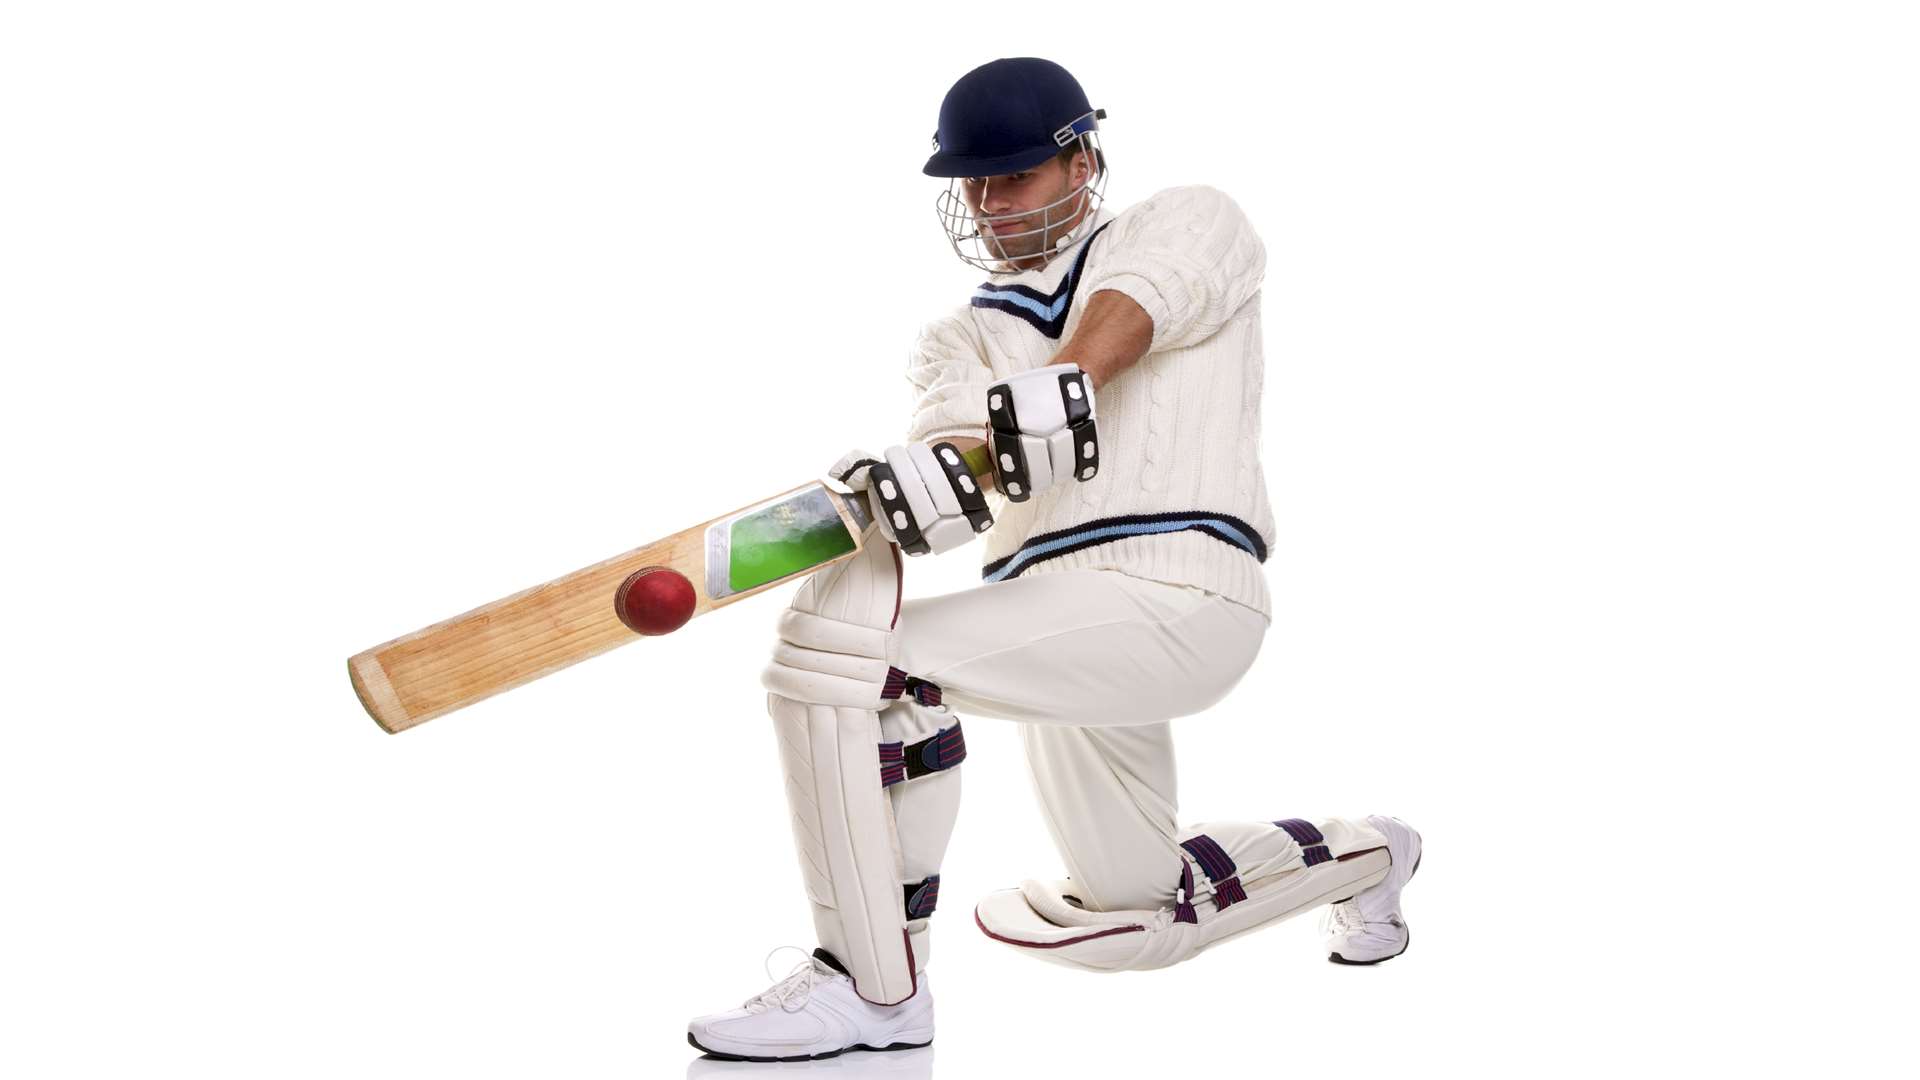 Aspiring cricketers can take part in a range of courses next month